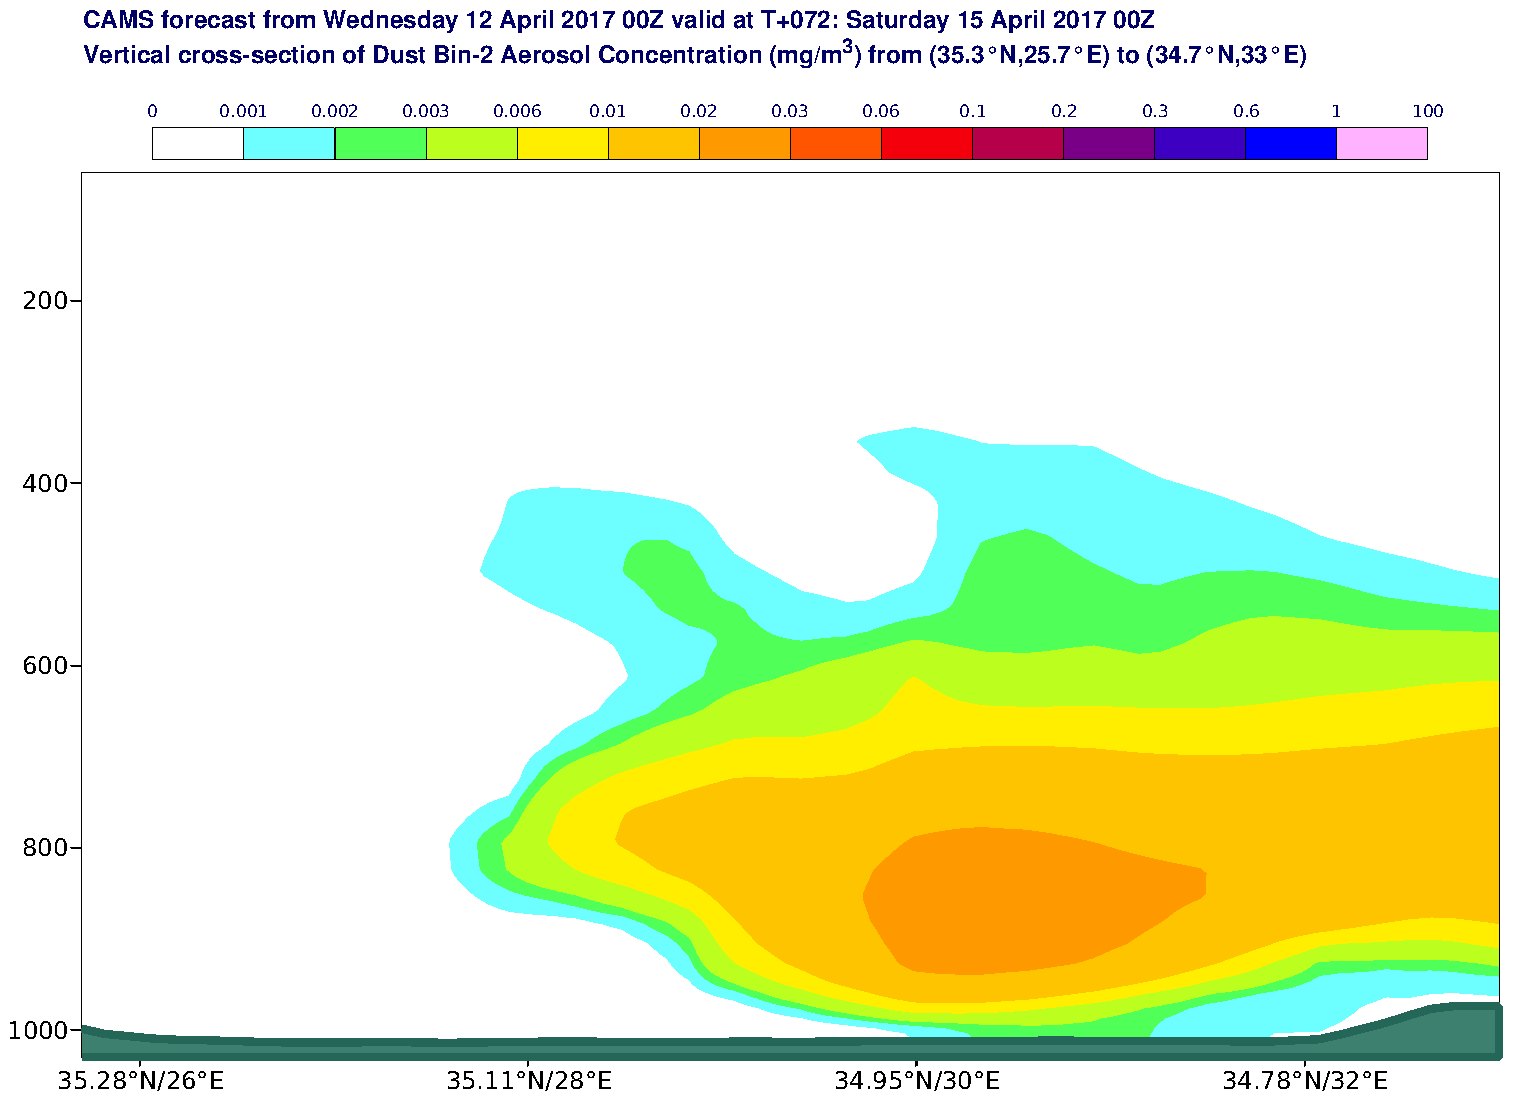 Vertical cross-section of Dust Bin-2 Aerosol Concentration (mg/m3) valid at T72 - 2017-04-15 00:00